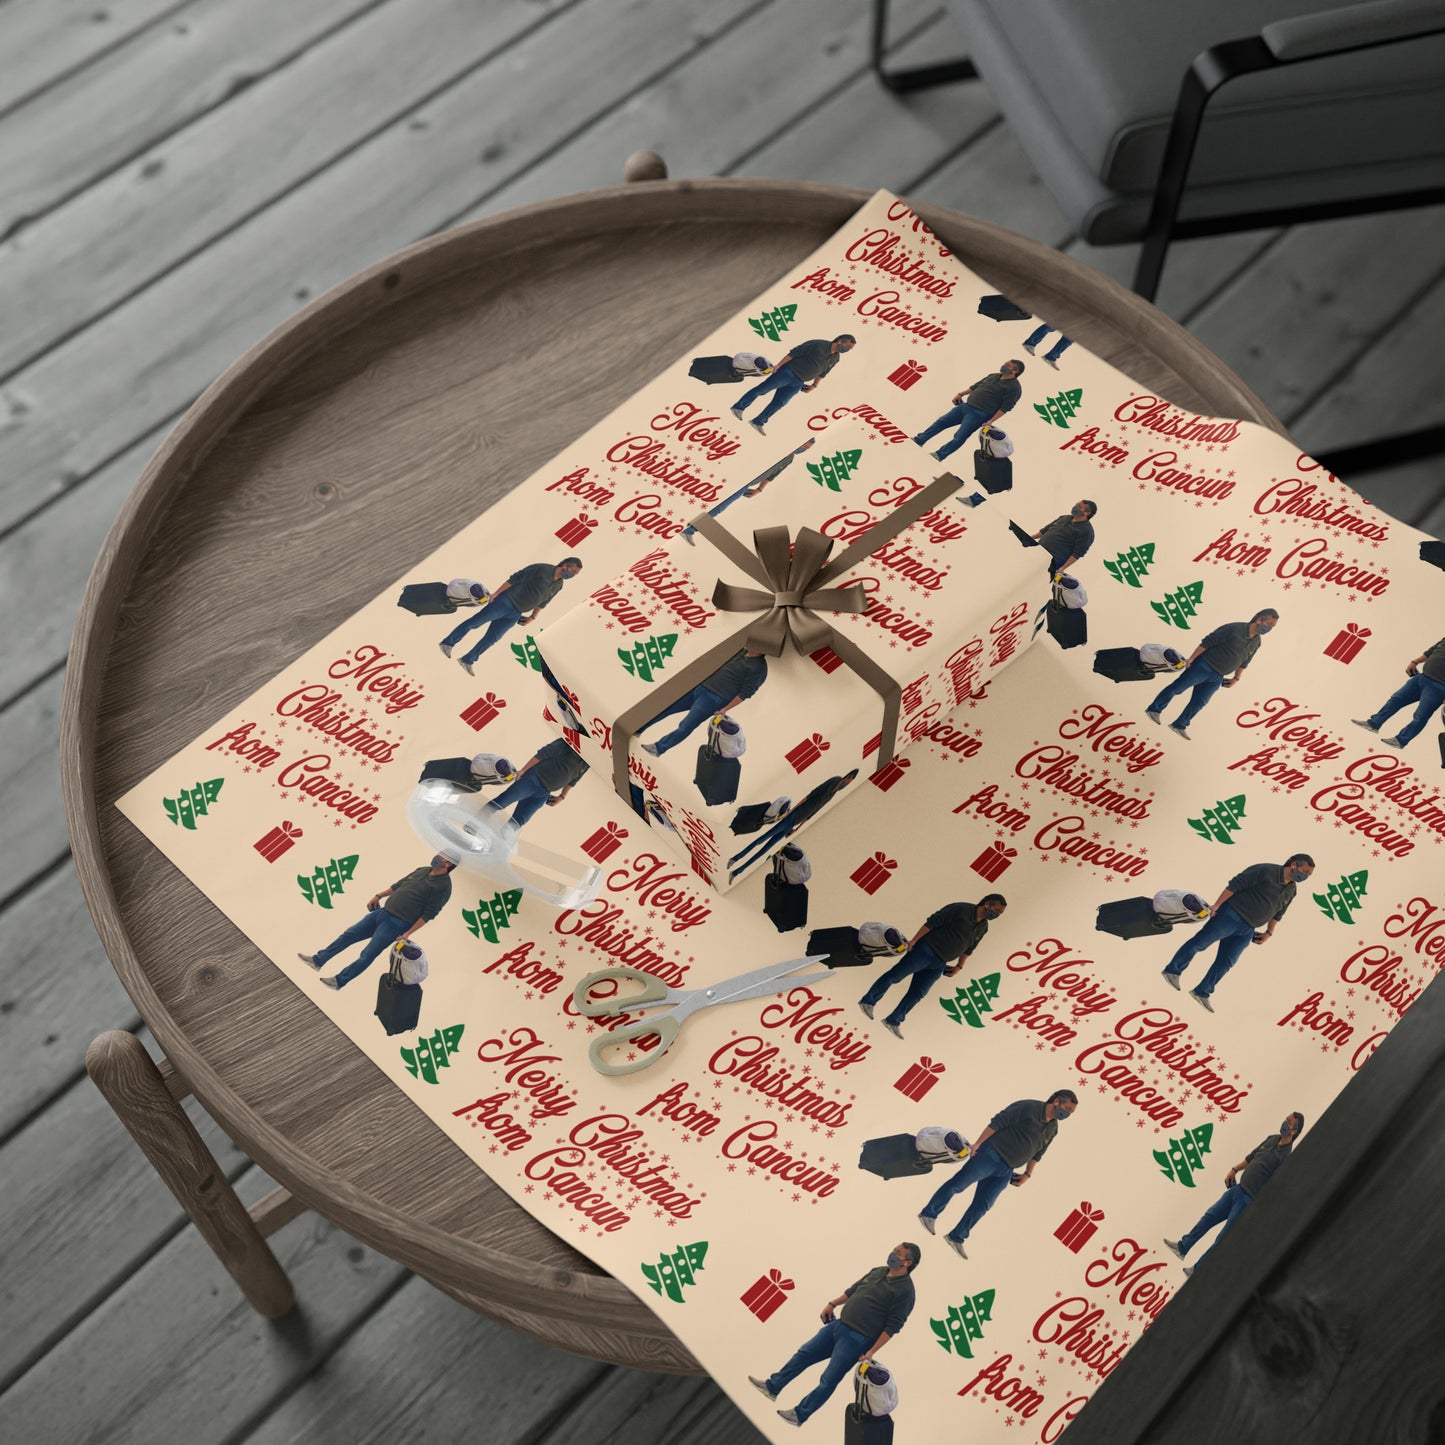 Funny Ted Cruz Christmas Wrapping Paper for Gifts - Cancun Cruz Gift - Ted Cruz Meme